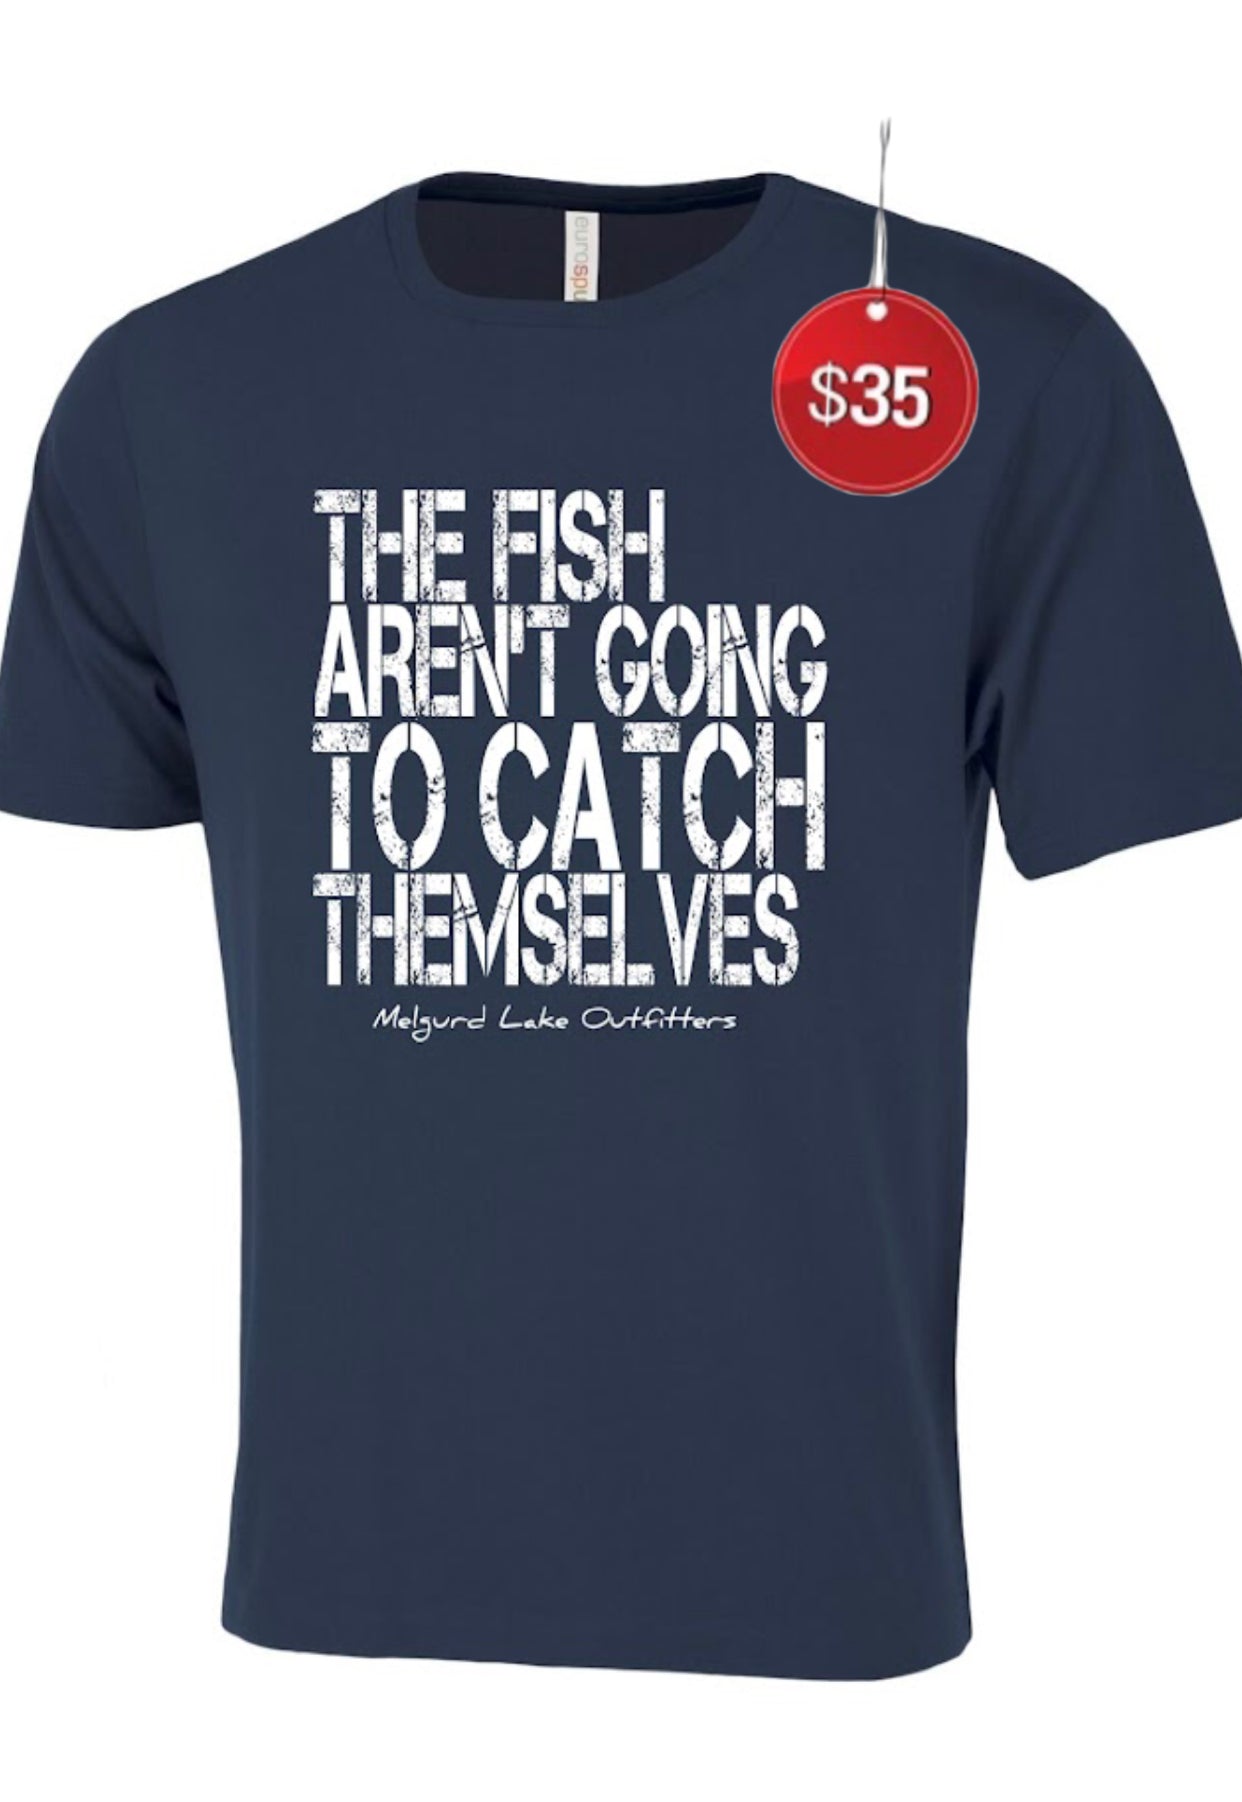 Limited Edition Catch Outfitters chec at Navy Themselves - Tee – Discount Lake Melgurd taken $15